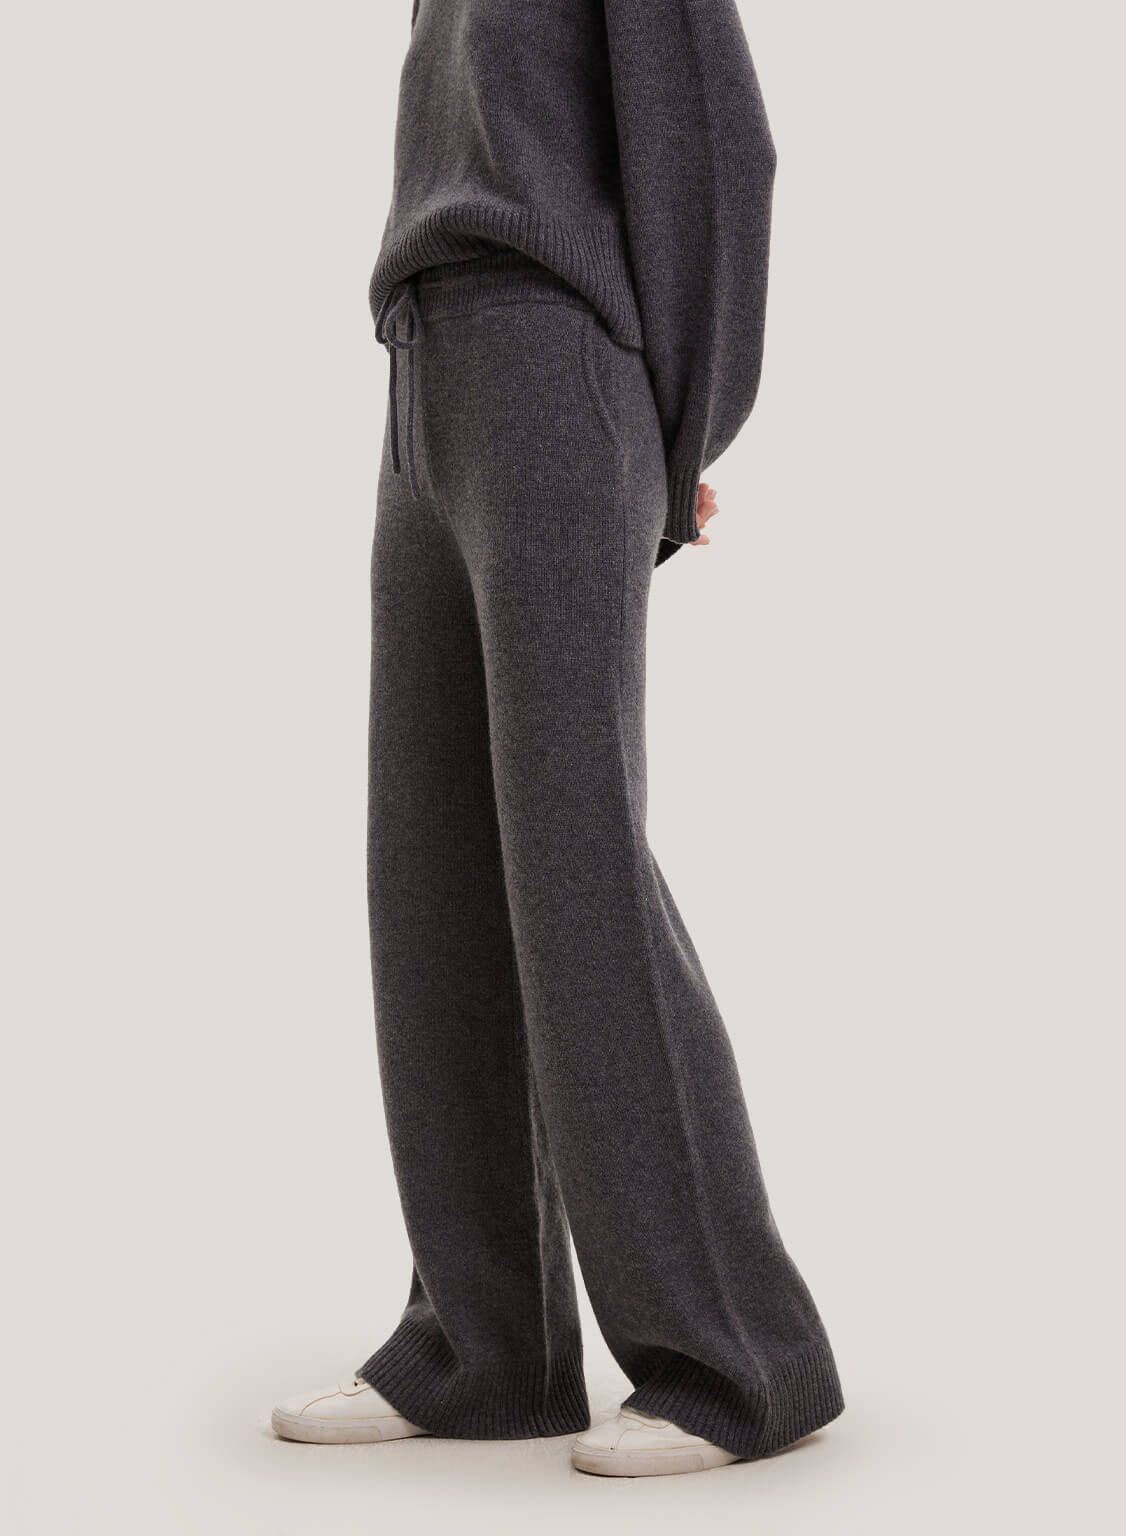 Trousers For Women: Stay Stylish and Comfortable with Chic Trousers for Women